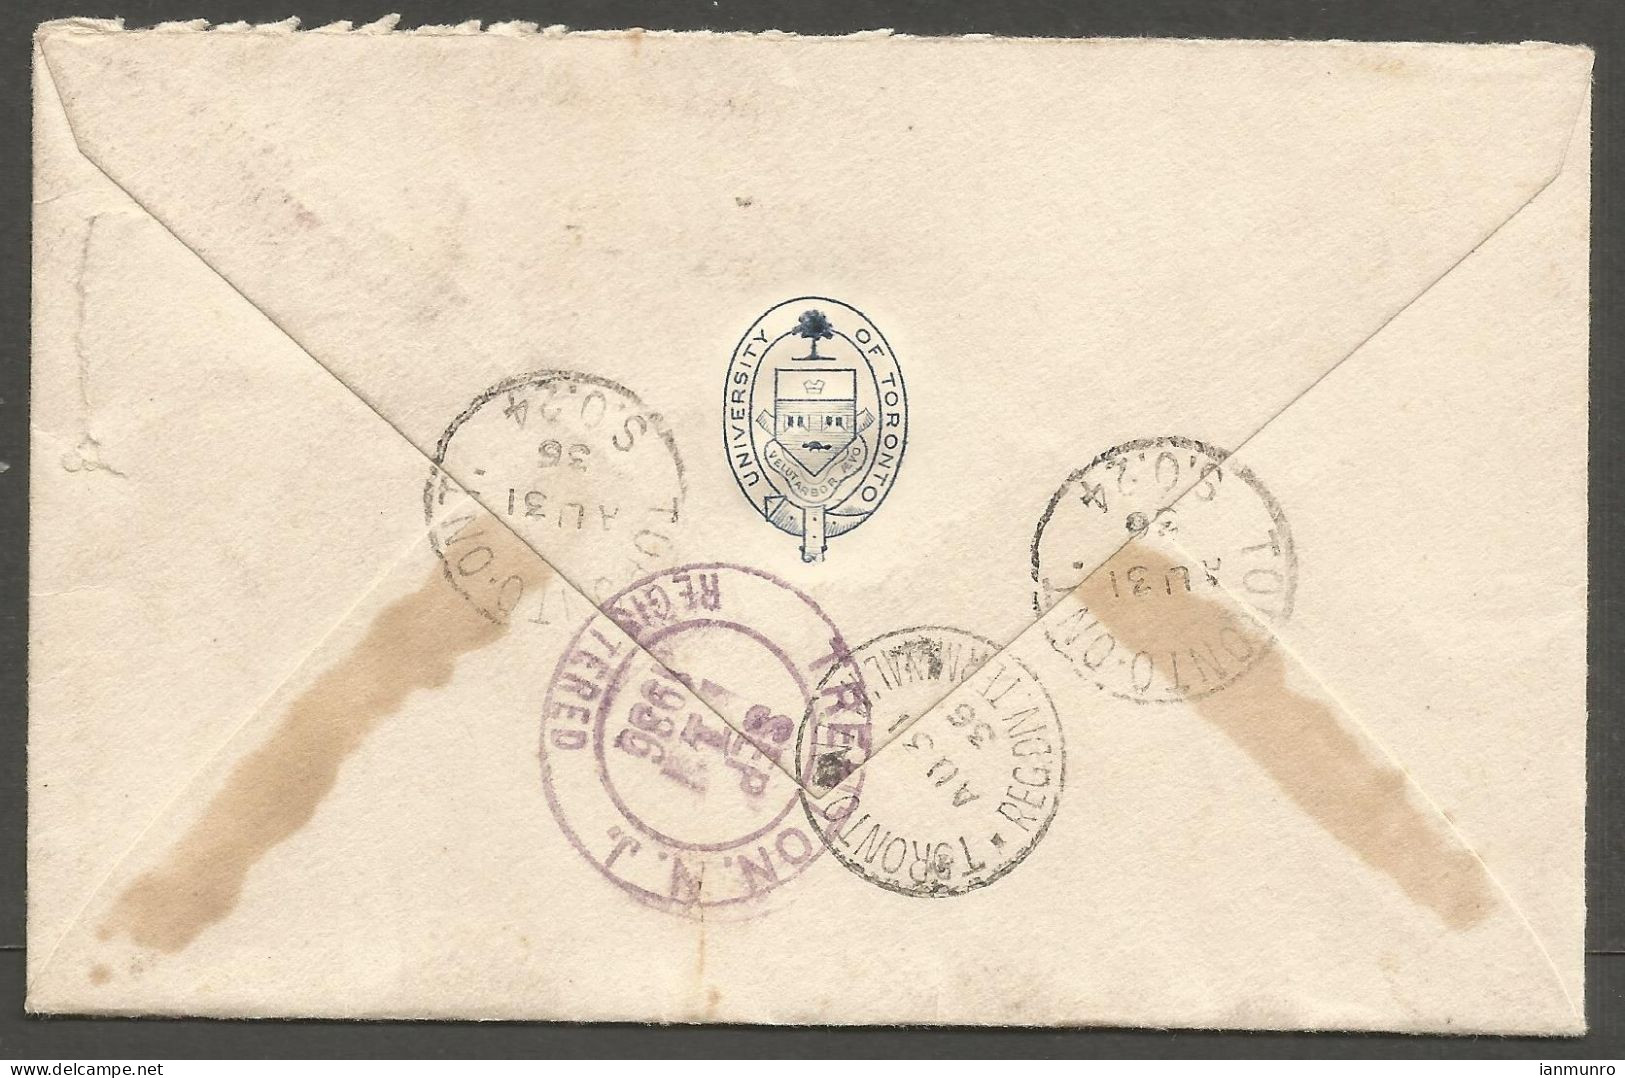 1936 University Of Toronto Registered Airmail Cover 16c Cartier/Pictorials CDS - Histoire Postale